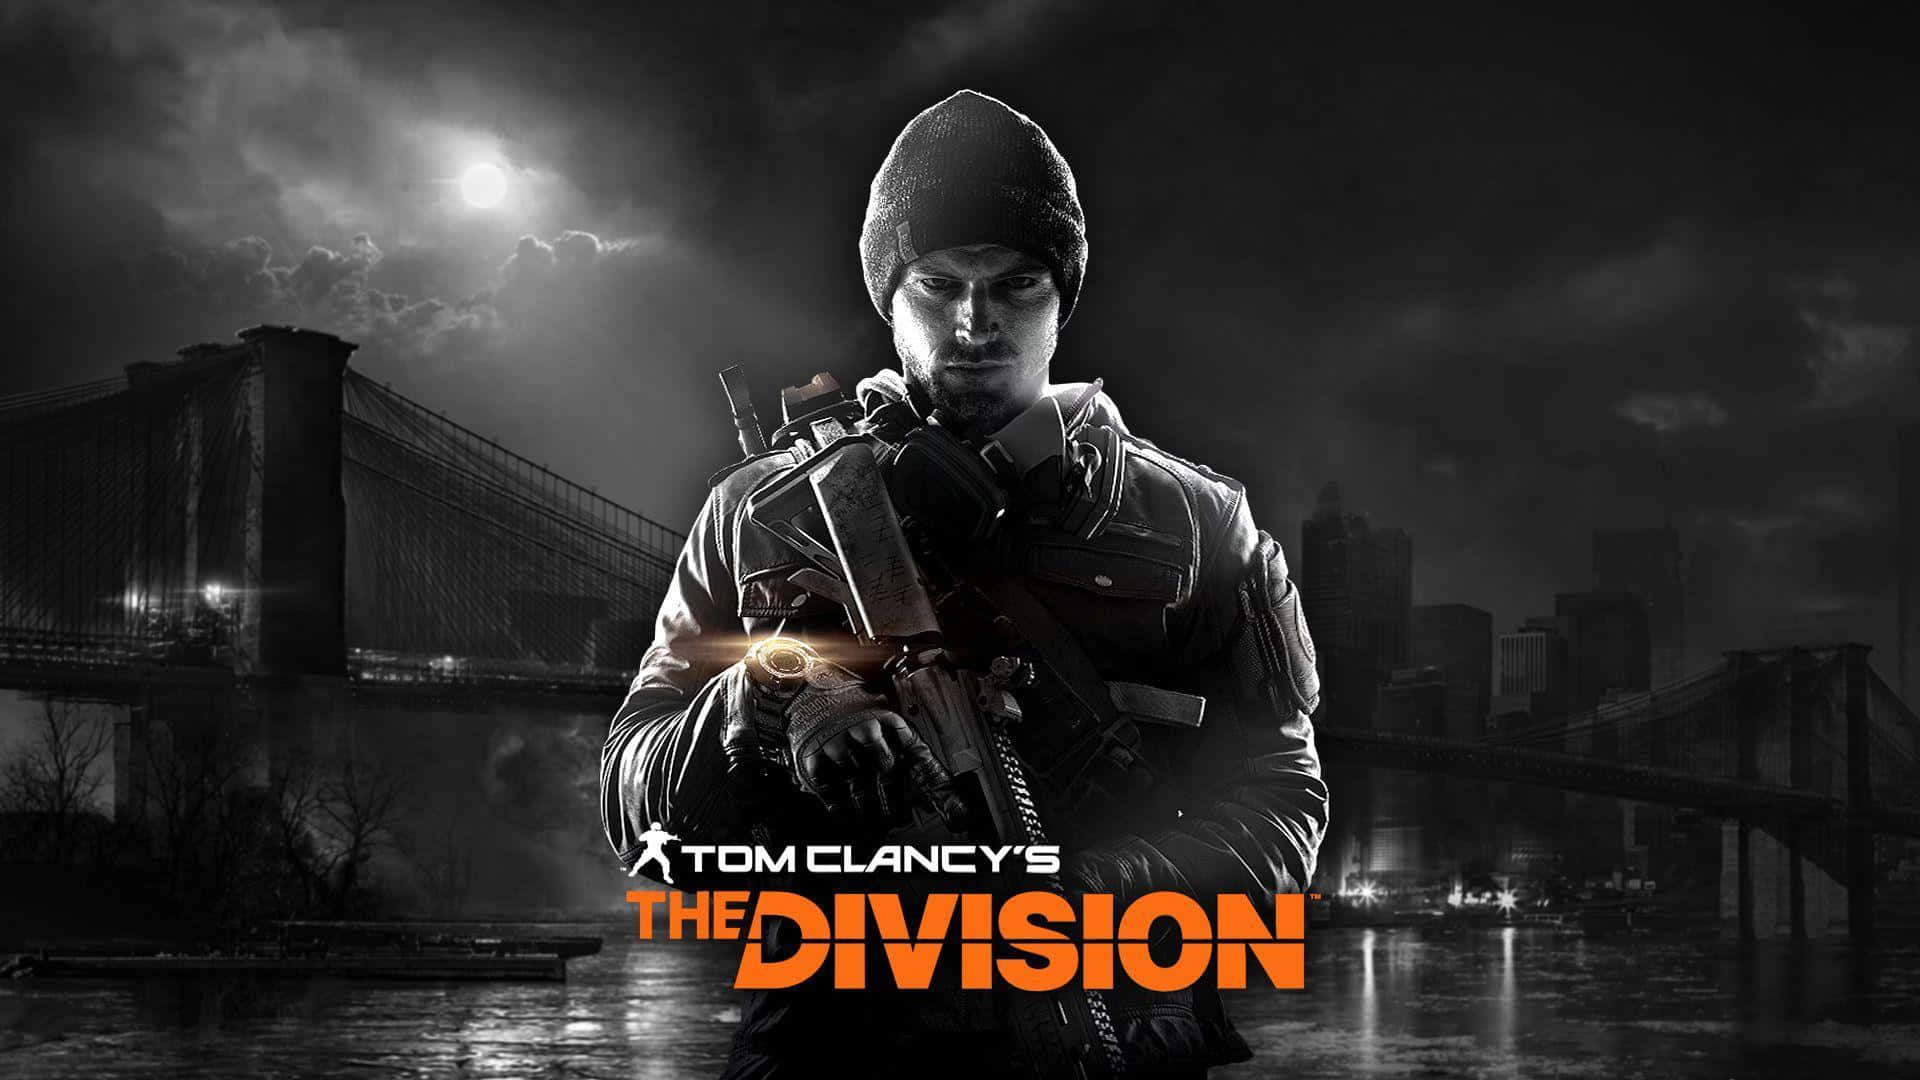 Agent Holding His Rifle The Division Desktop Wallpaper